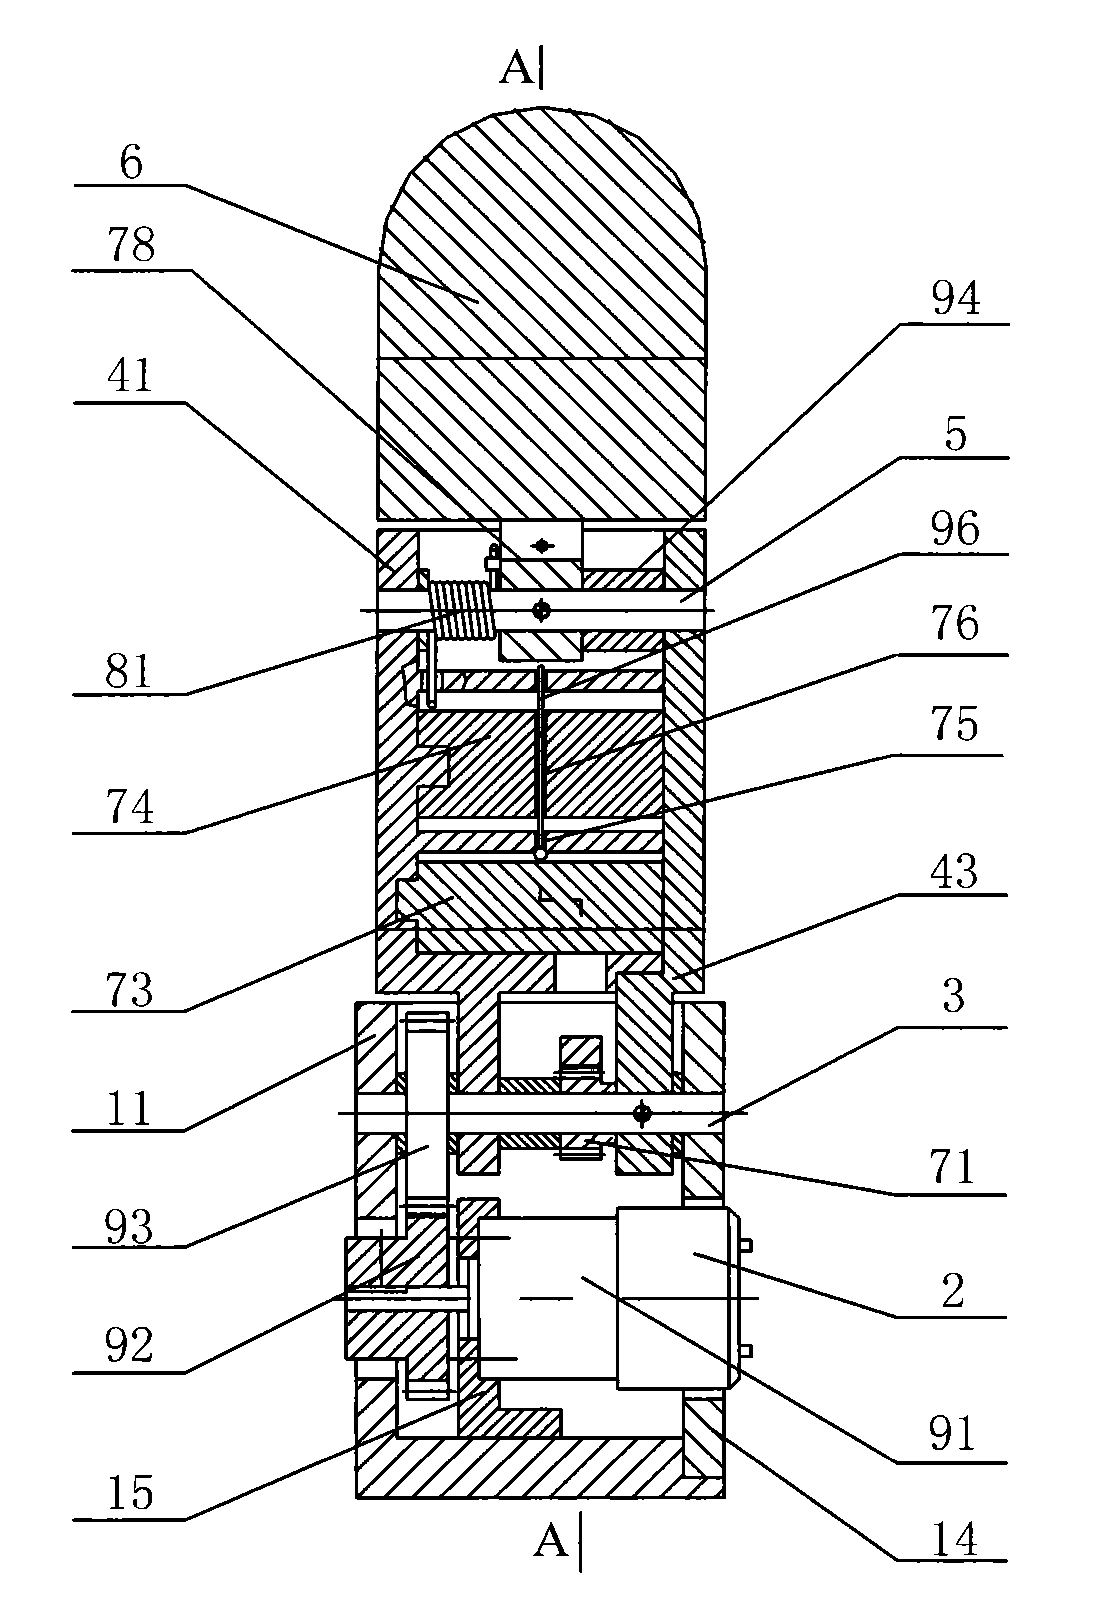 Flexible part and rack type parallel finger device integrating coupling and under-actuation